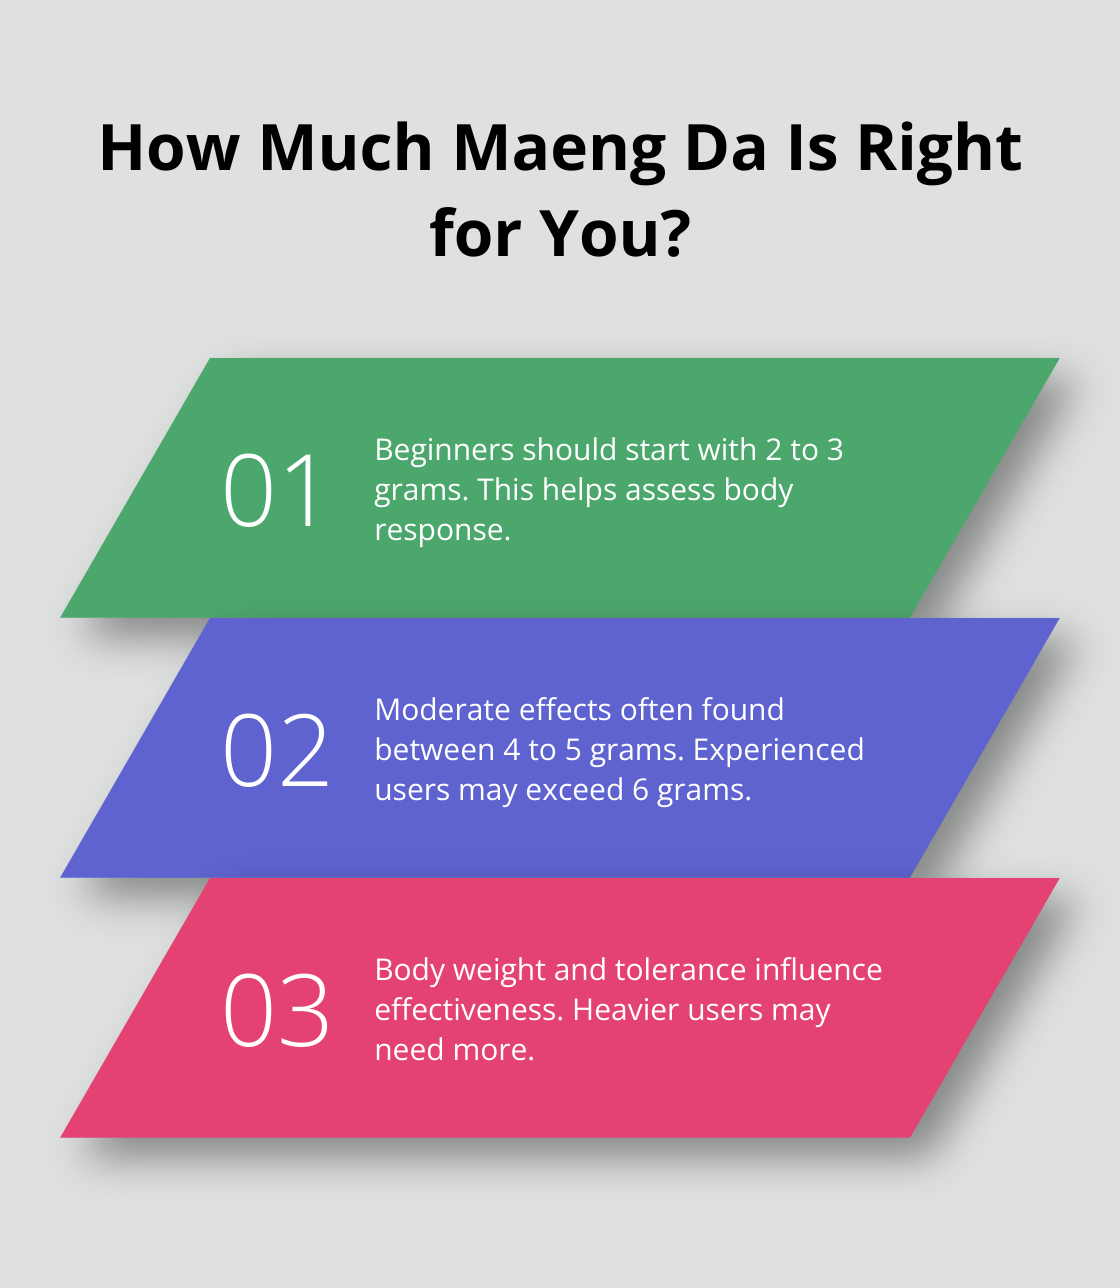 Fact - How Much Maeng Da Is Right for You?